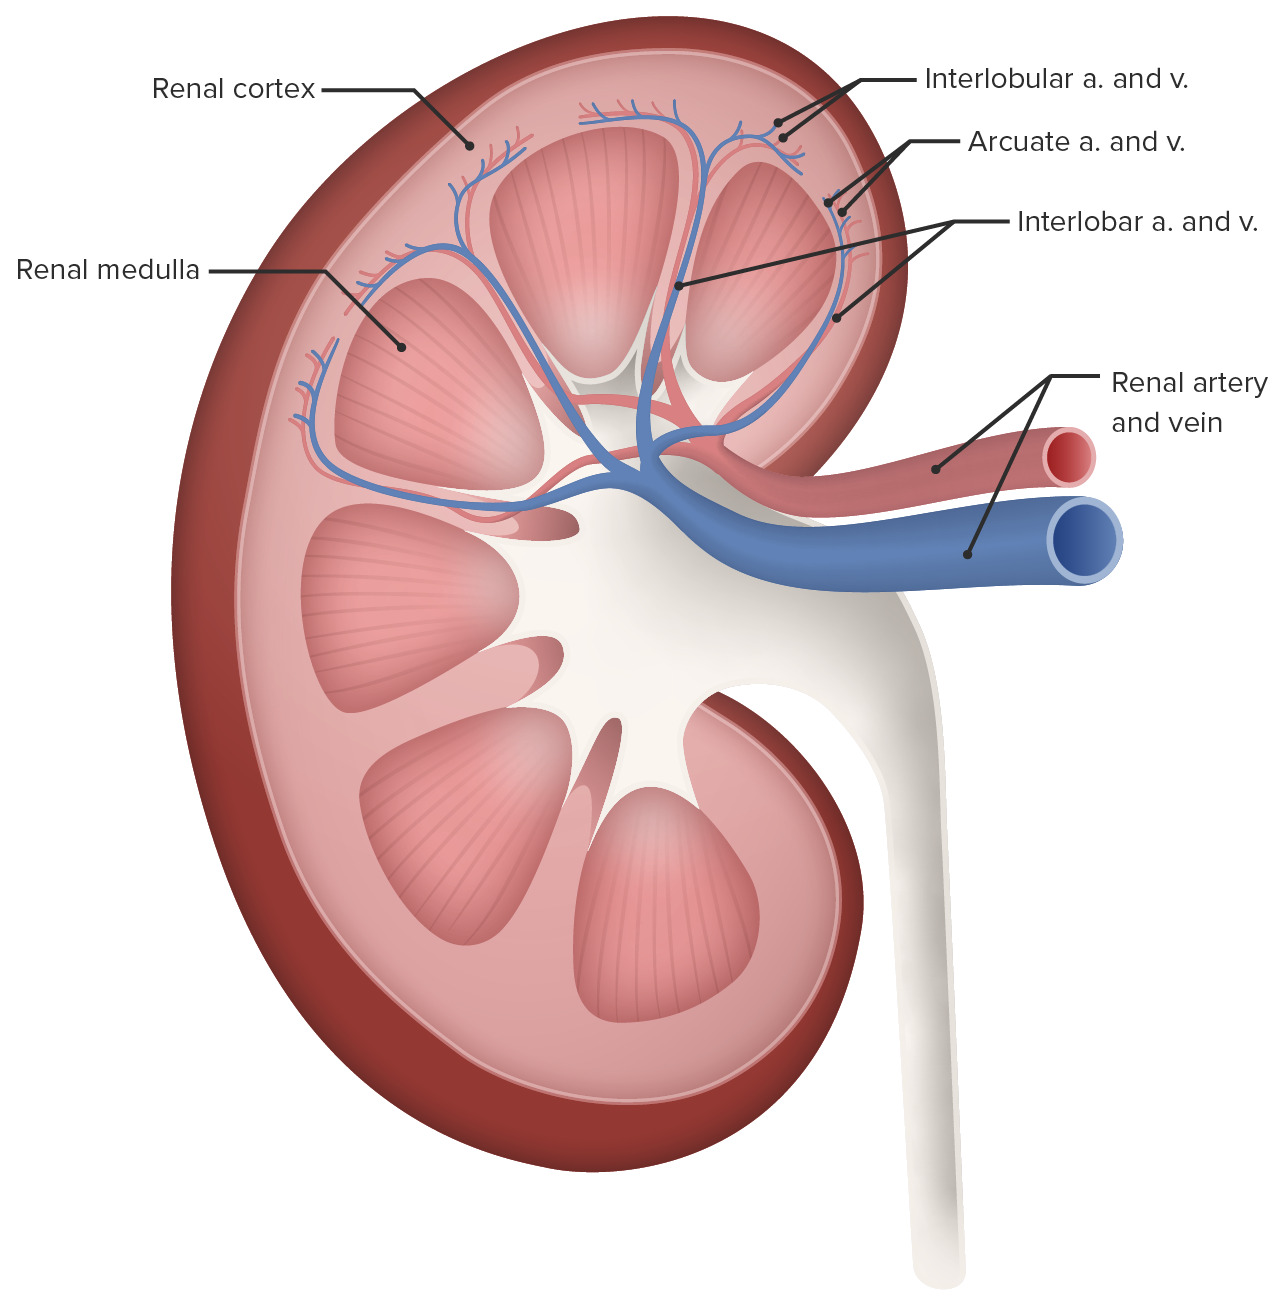 Glomerular Filtration: Renal Physiology | Concise Medical Knowledge